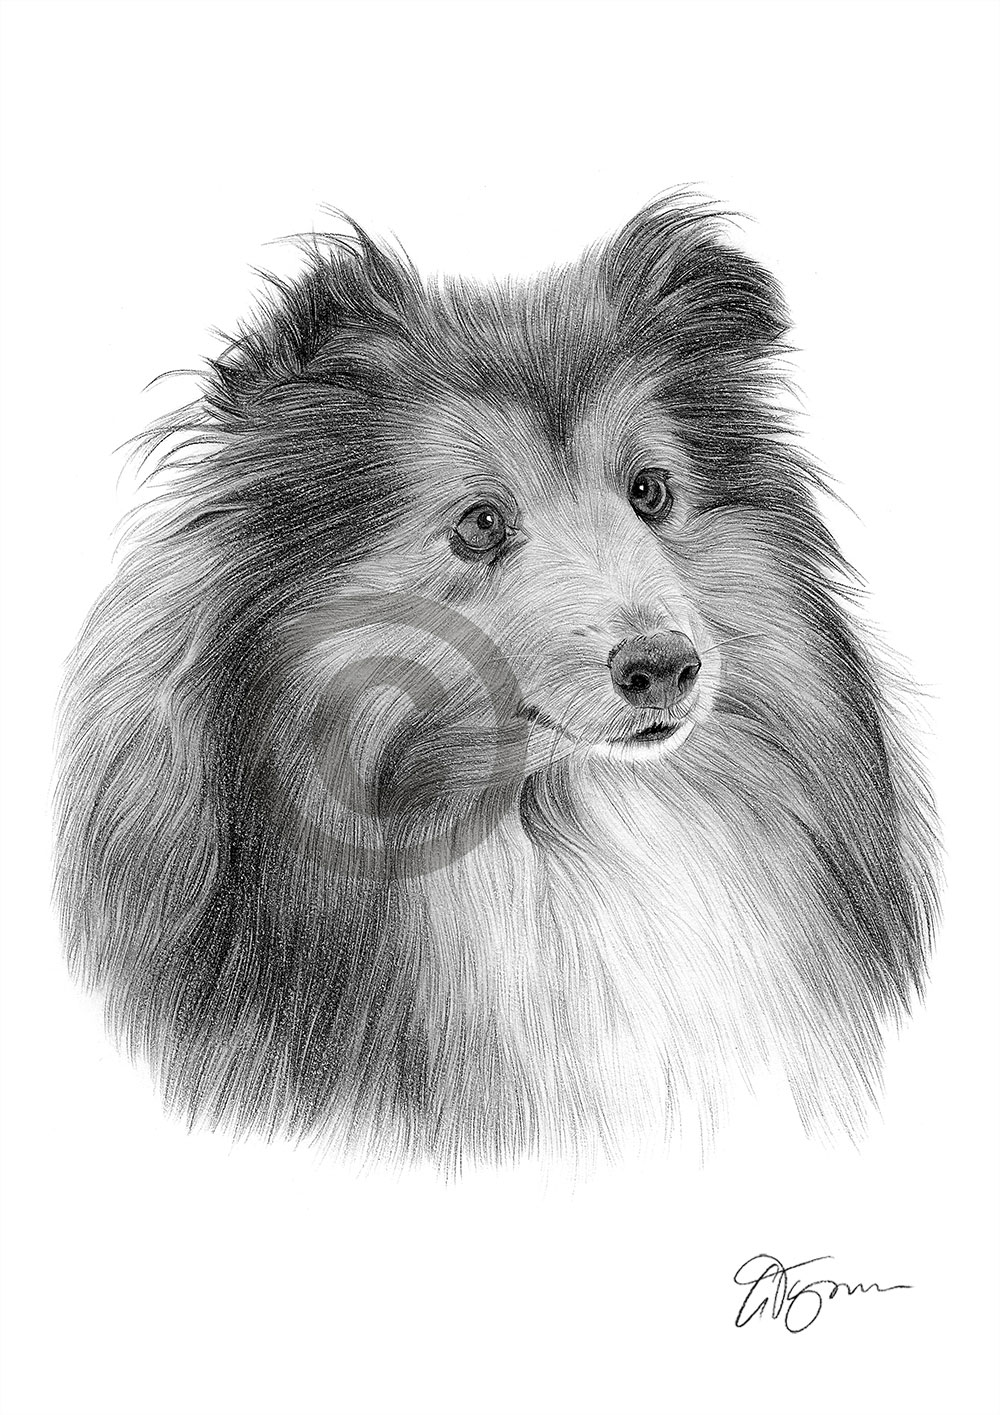 Pencil drawing of a Sheltie by artist Gary Tymon